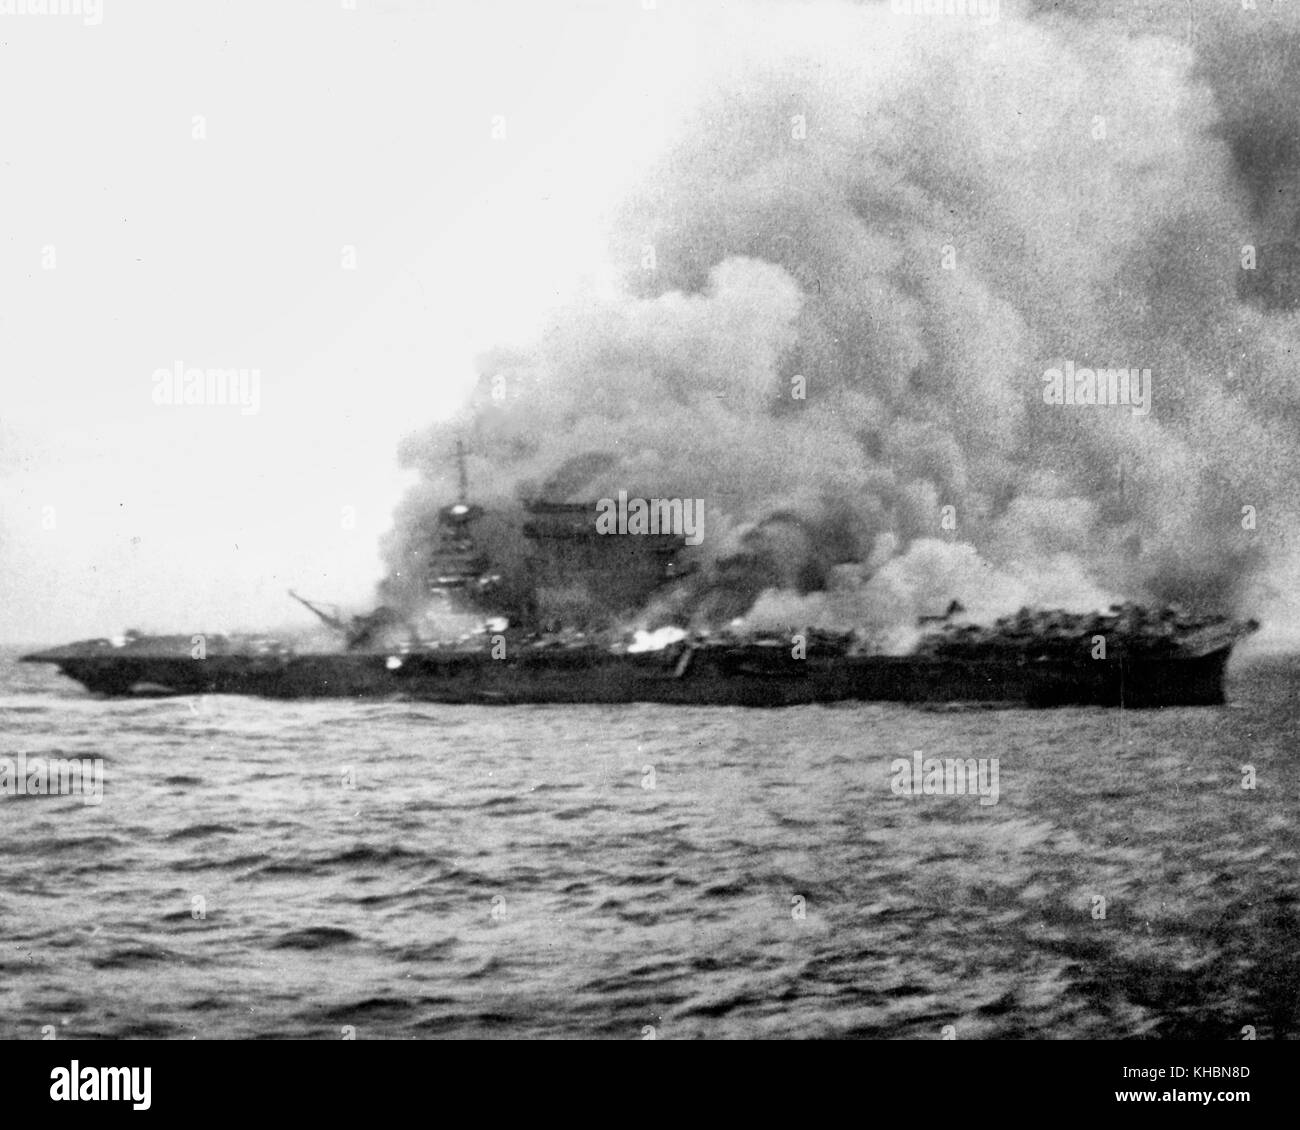 The U.S. Navy aircraft carrier USS Lexington (CV-2), burning and sinking after her crew abandoned ship during the Battle of Coral Sea, 8 May 1942. Note planes parked aft, where fires have not yet reached. Stock Photo